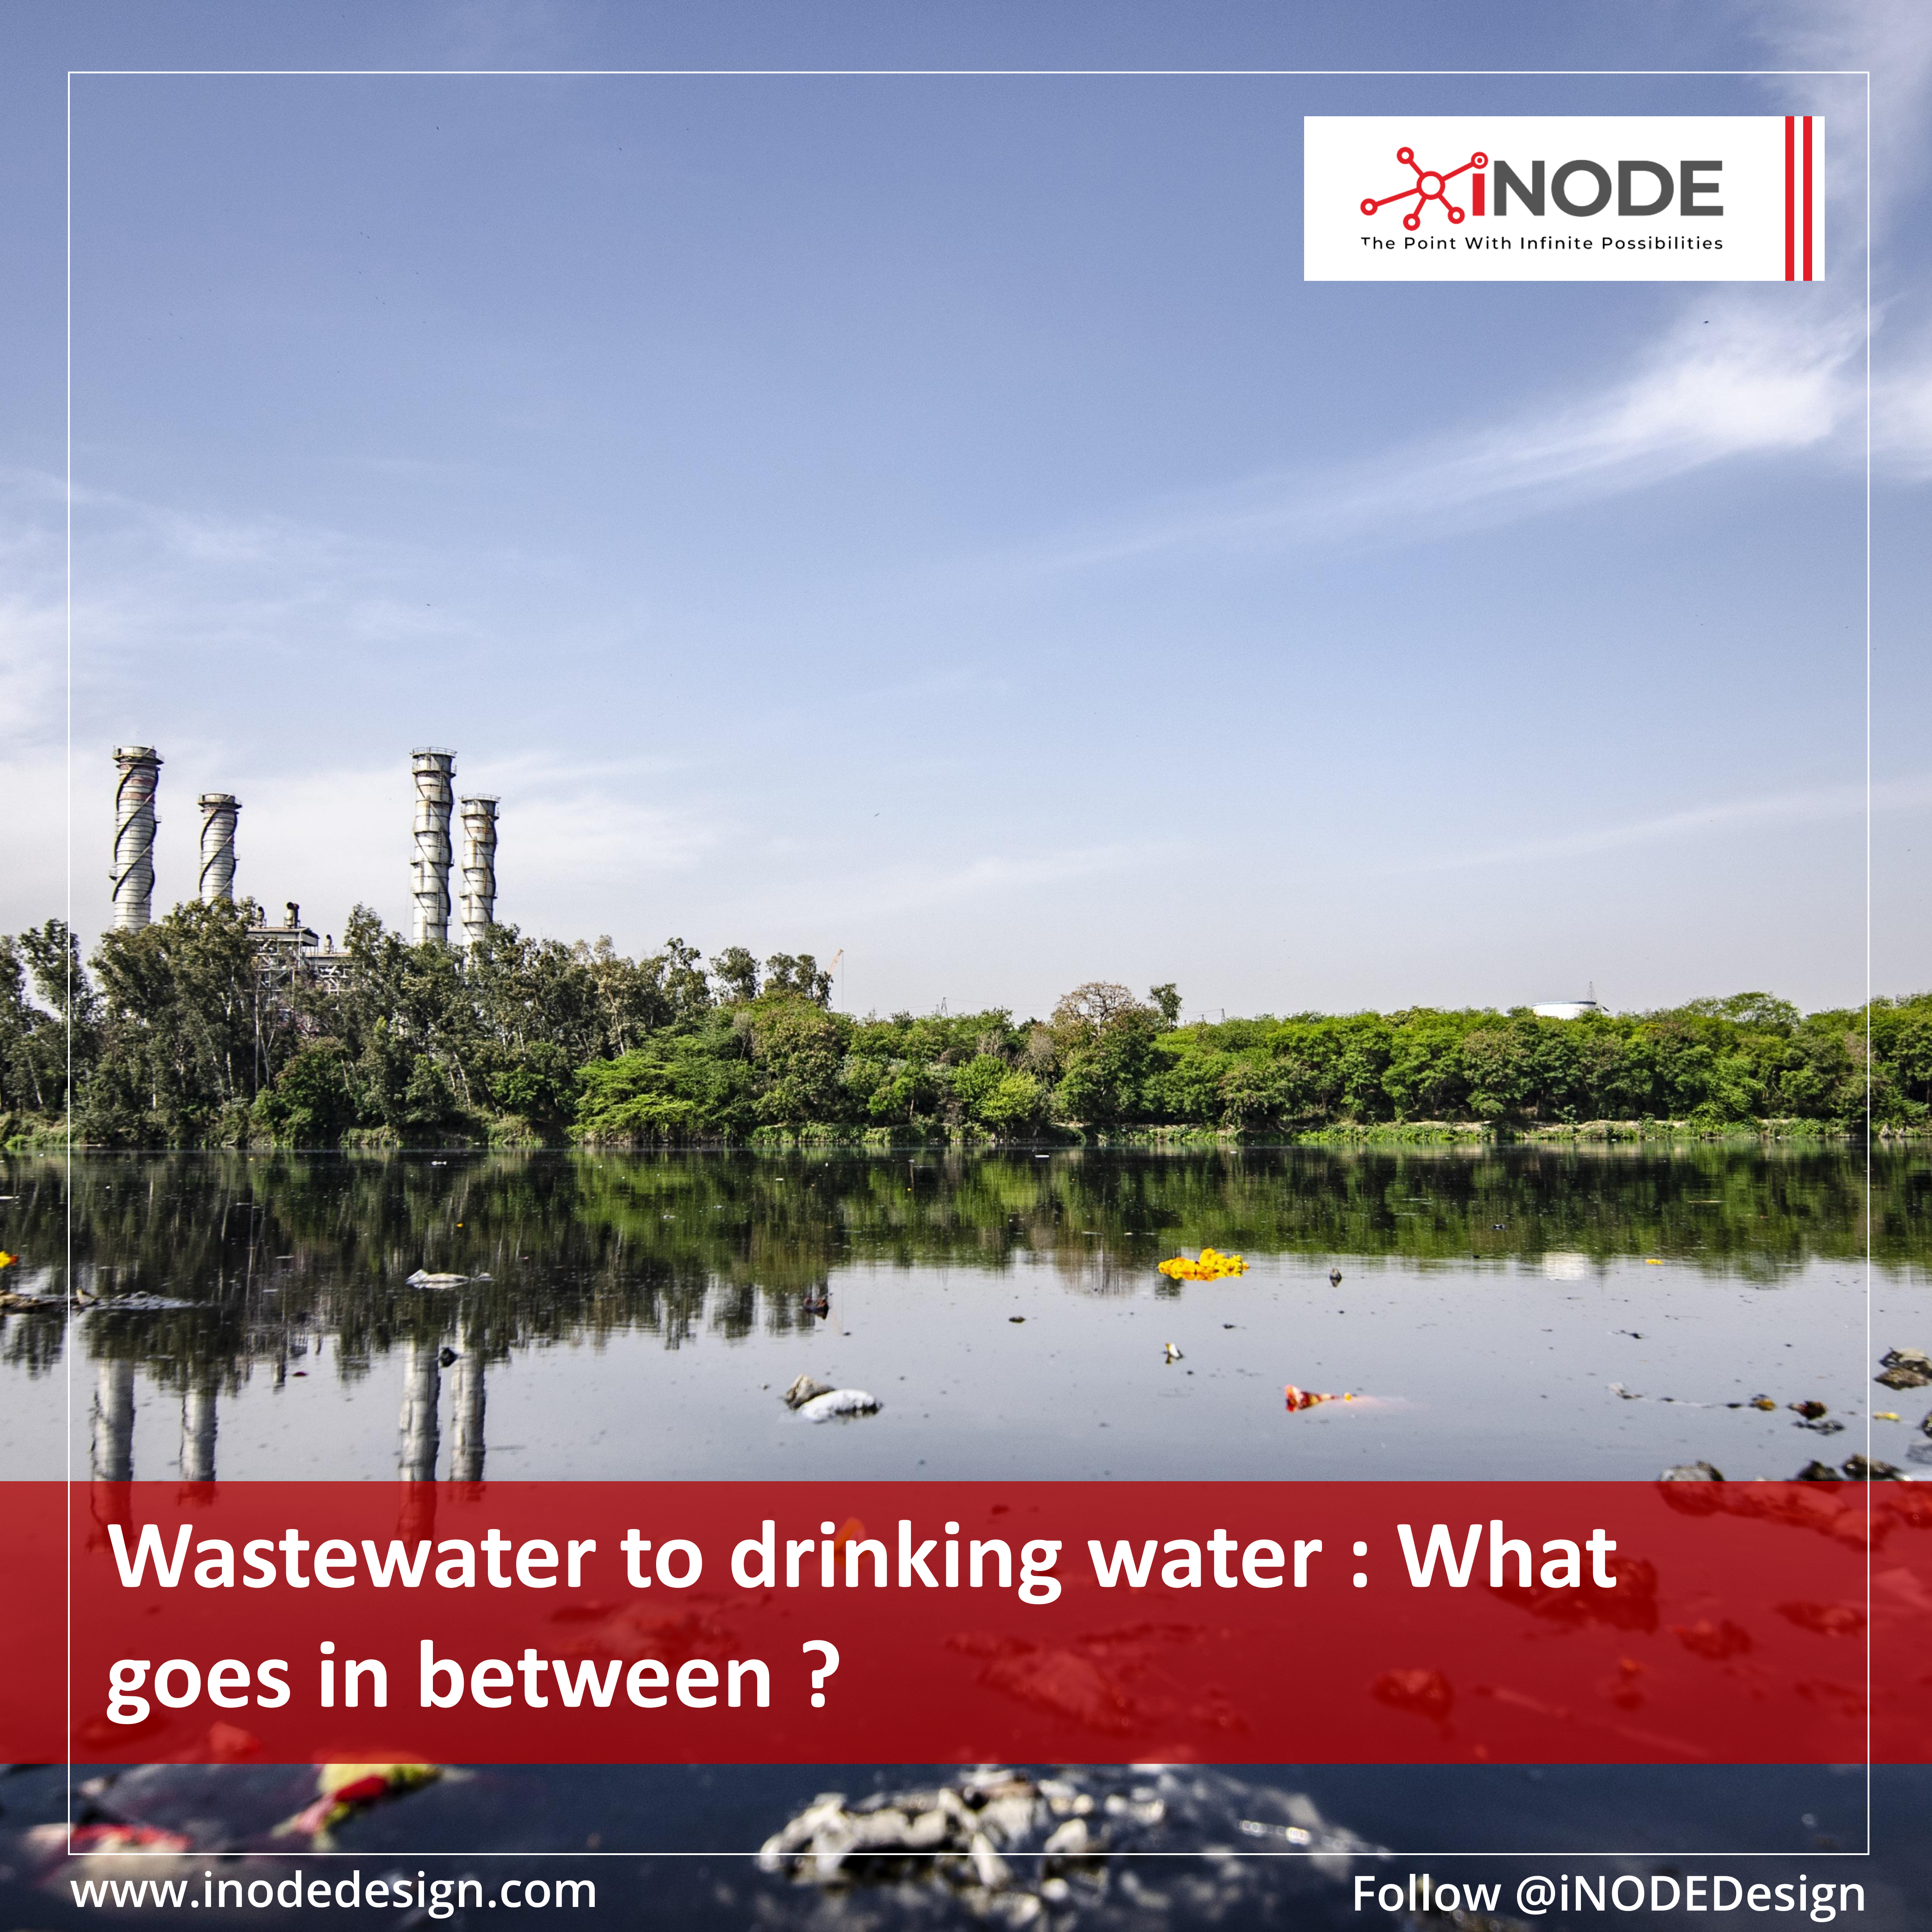 Wastewater to Drinking Water: What Goes in Between?